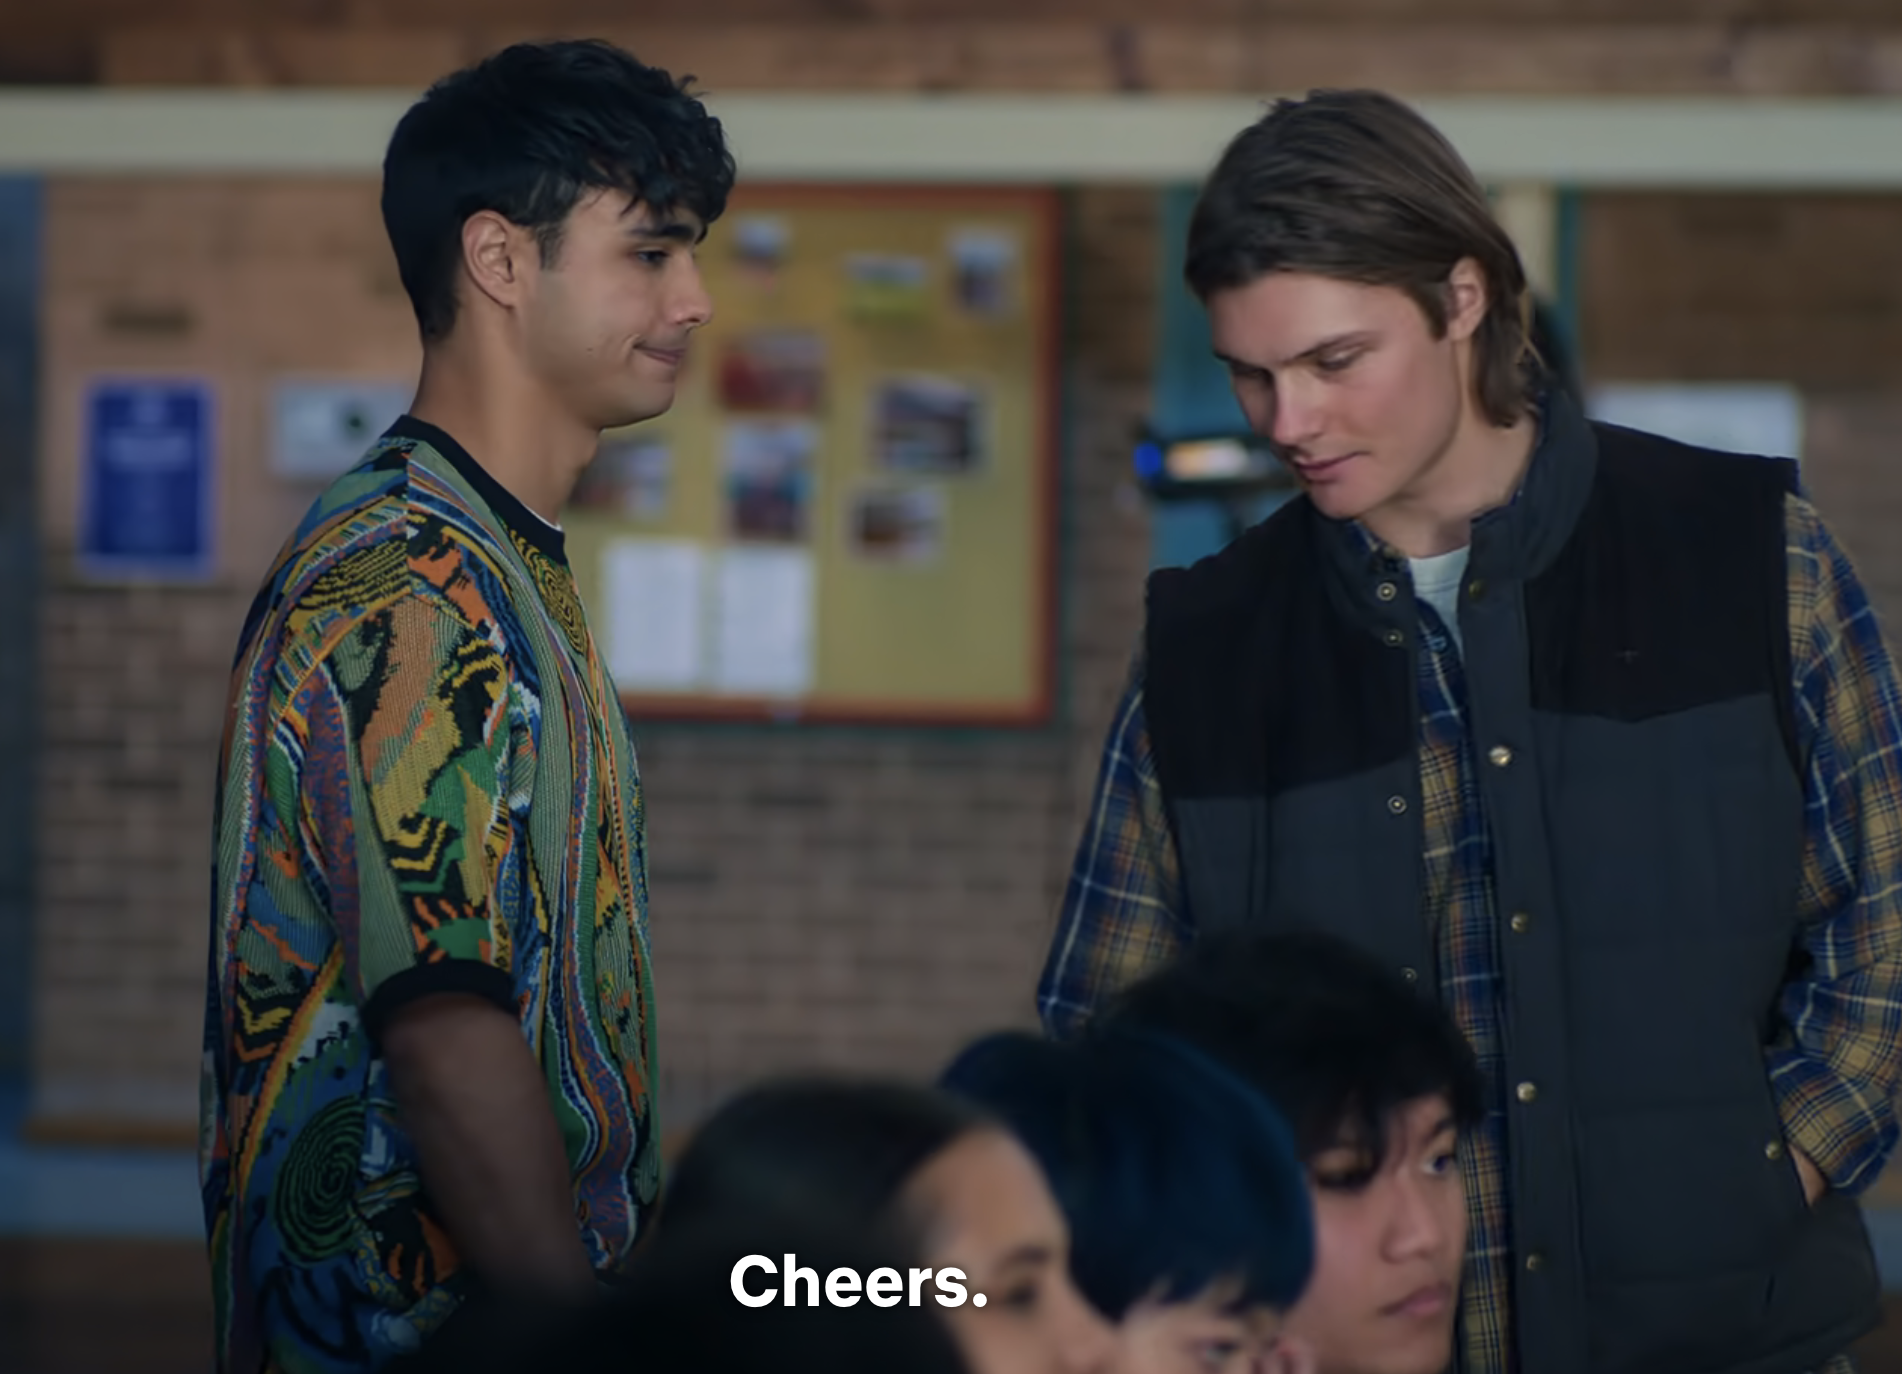 Two actors in a scene, one in a patterned shirt and the other in a plaid jacket, appearing to have a conversation